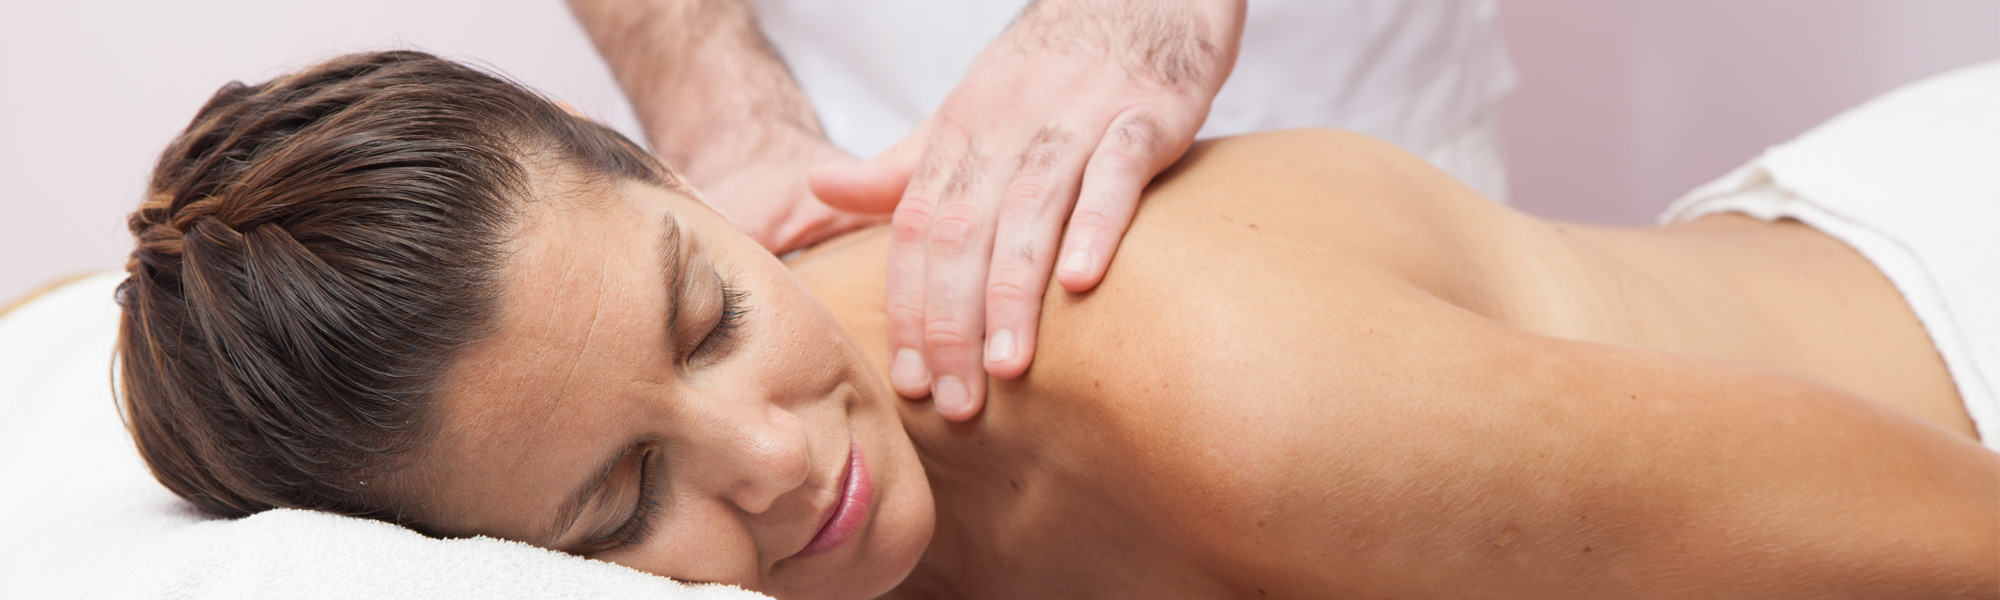 Benefits of massage therapy?